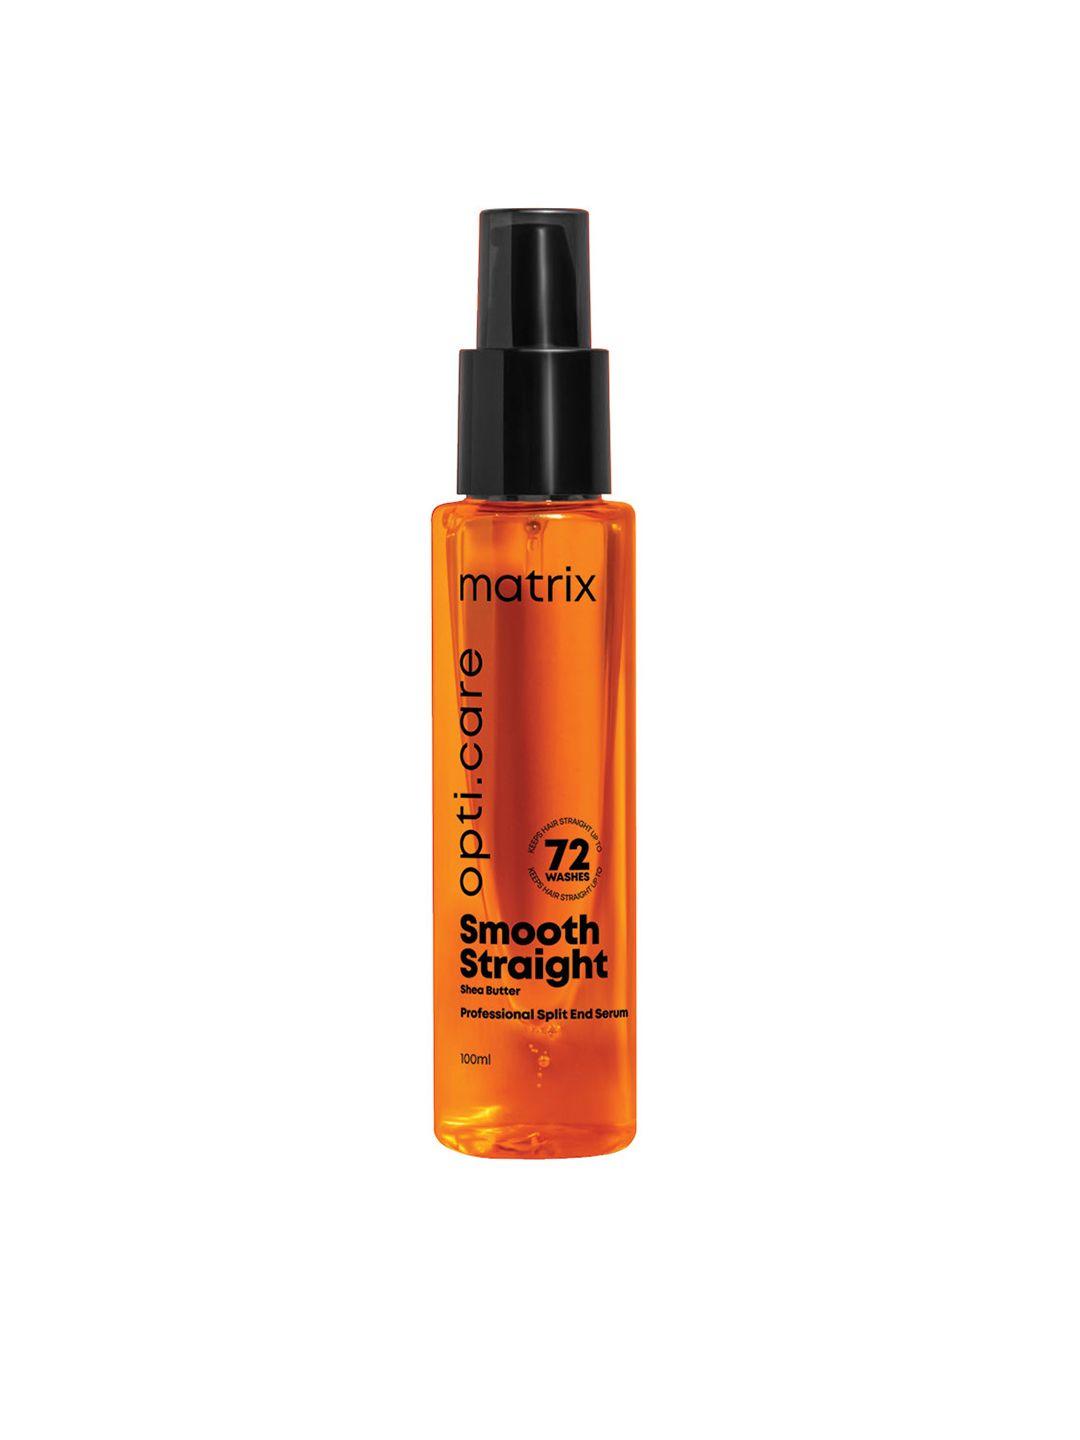 matrix opti care smooth straight professional split end hair serum with shea butter-100ml